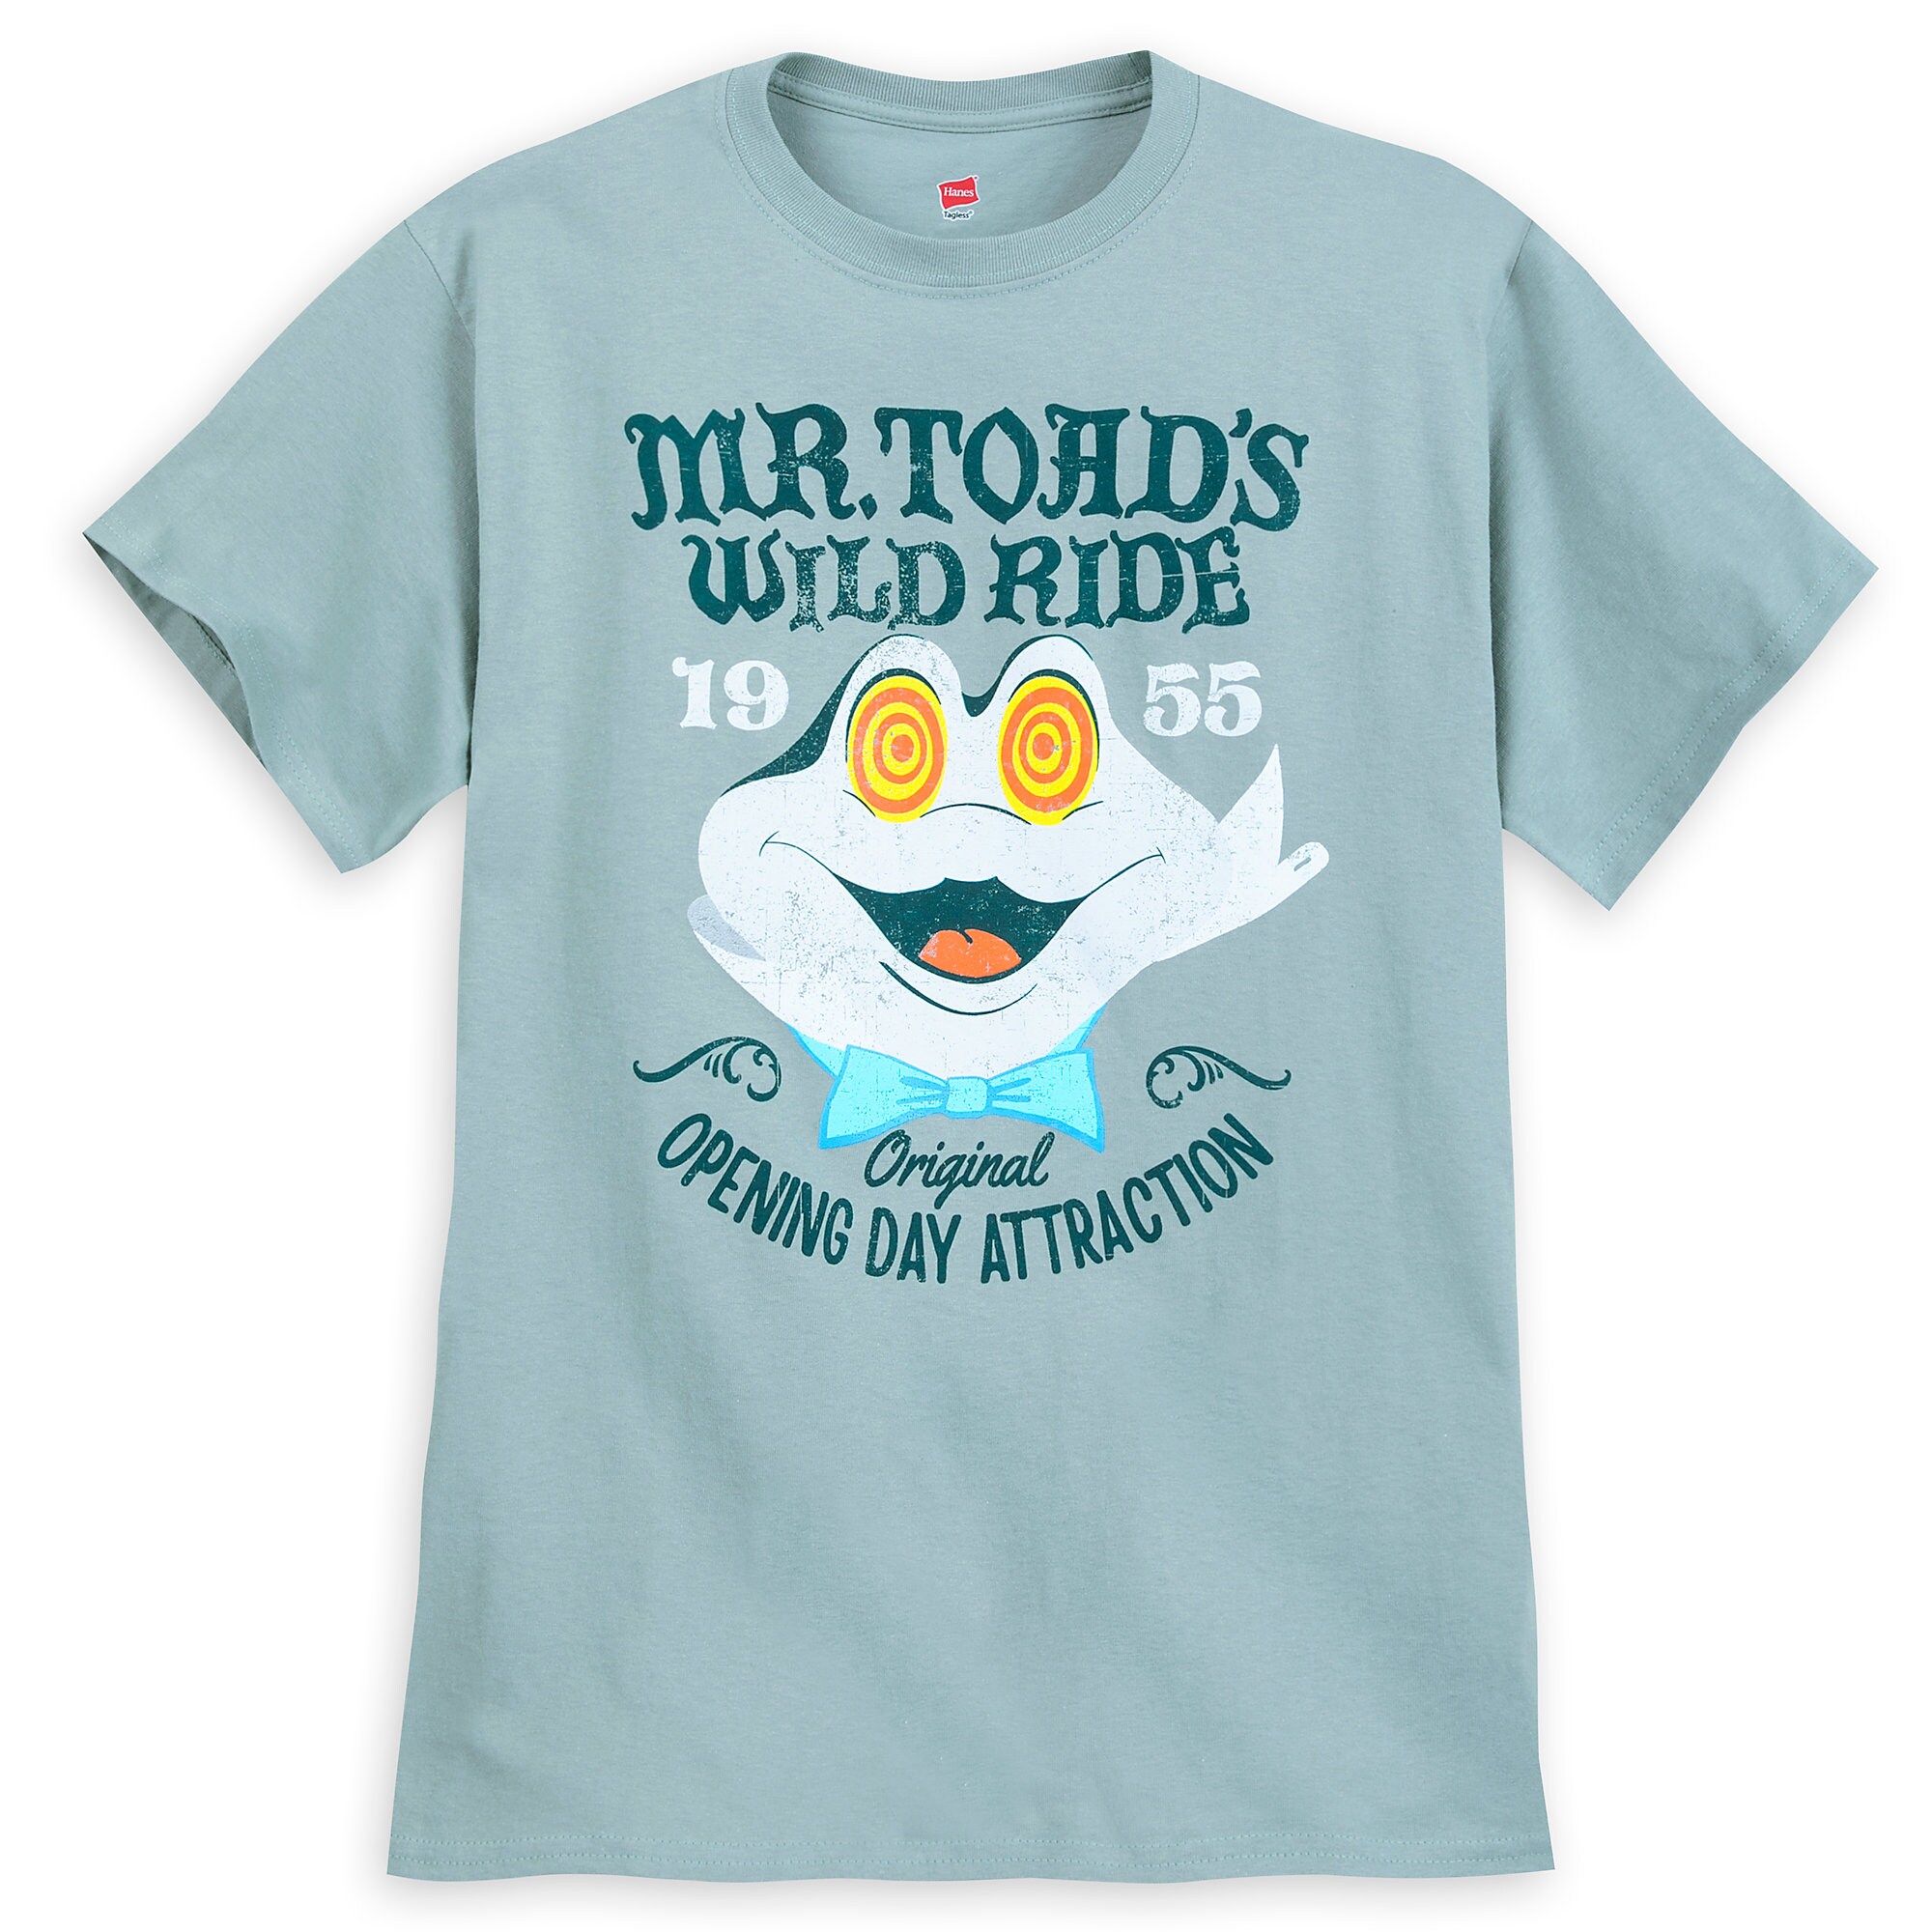 Mr. Toad's Wild Ride T-Shirt for Adults